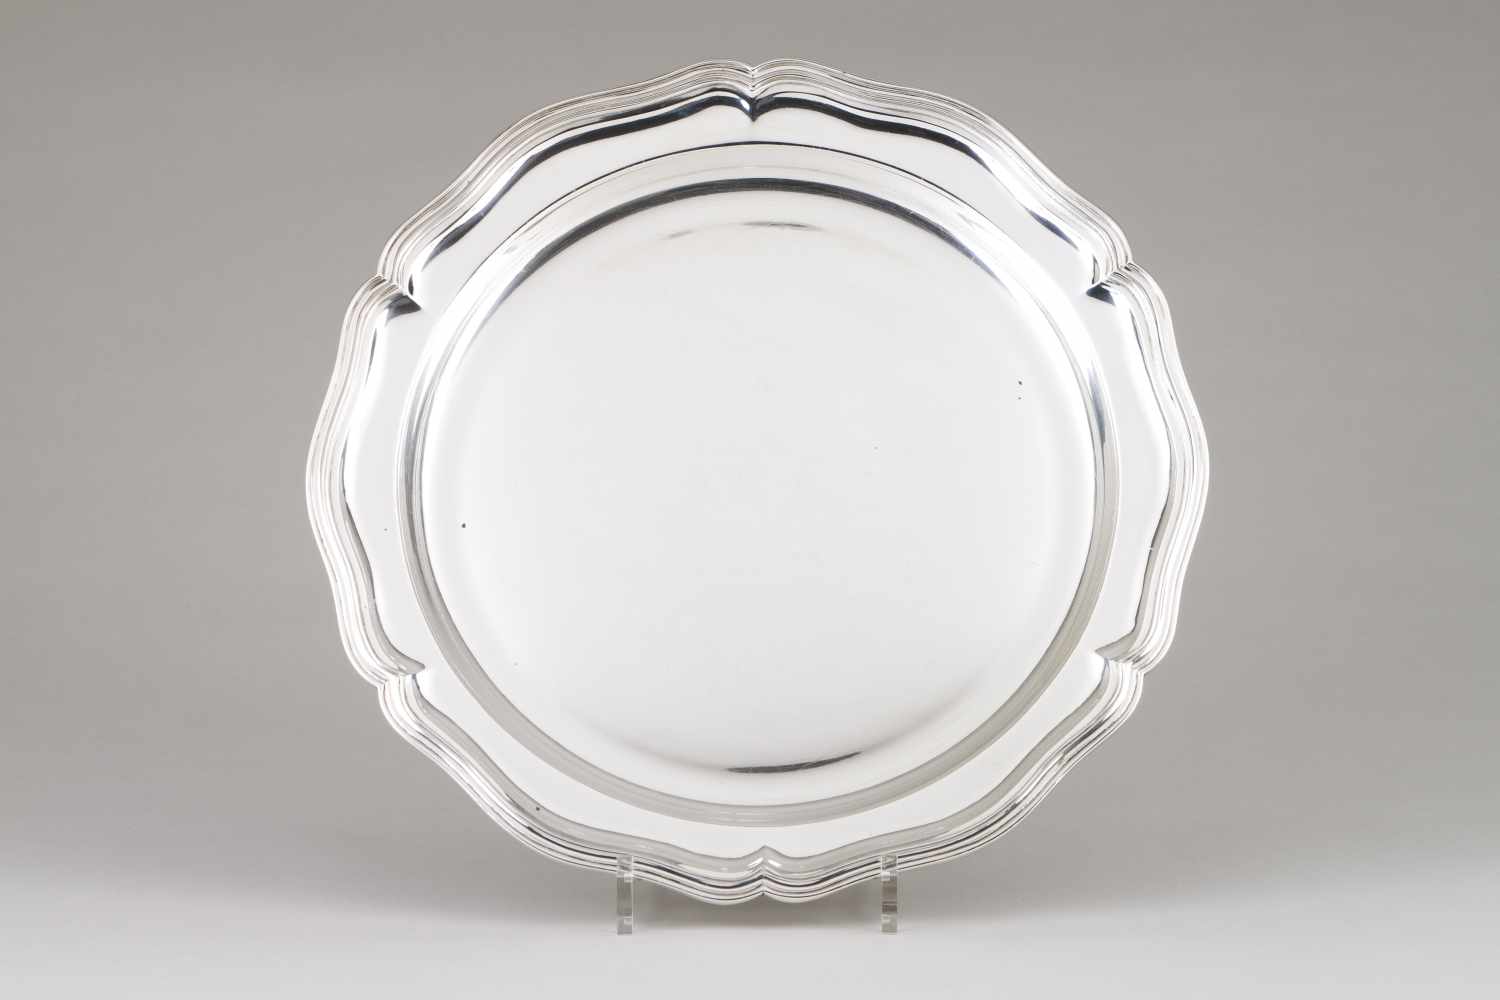 A serving plate